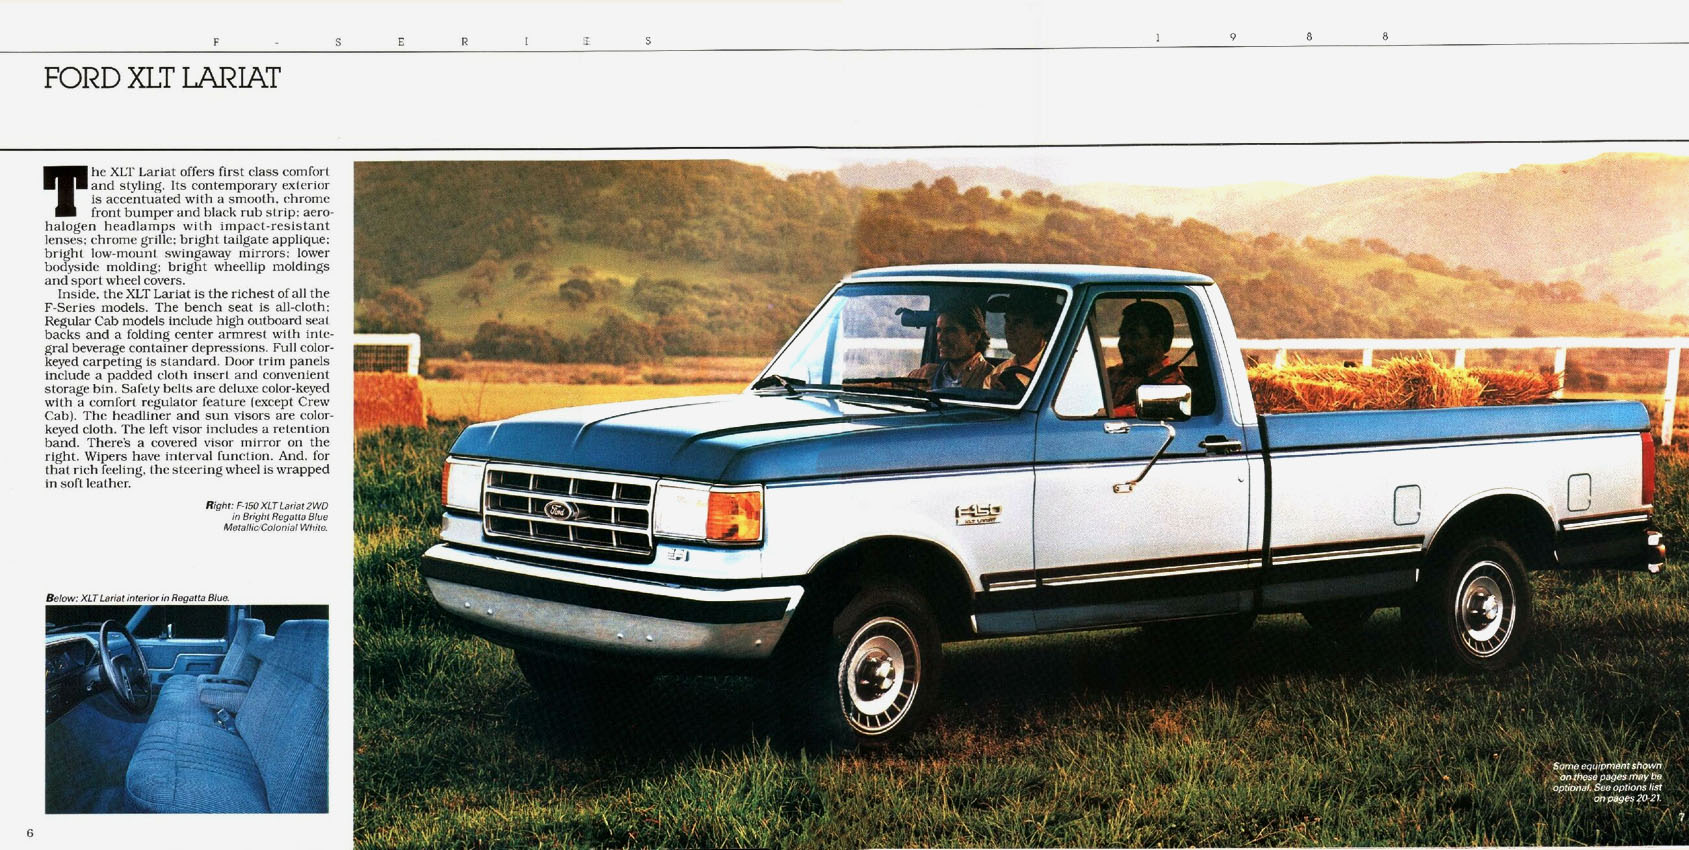 1989 Ford f-150 owner manual #4